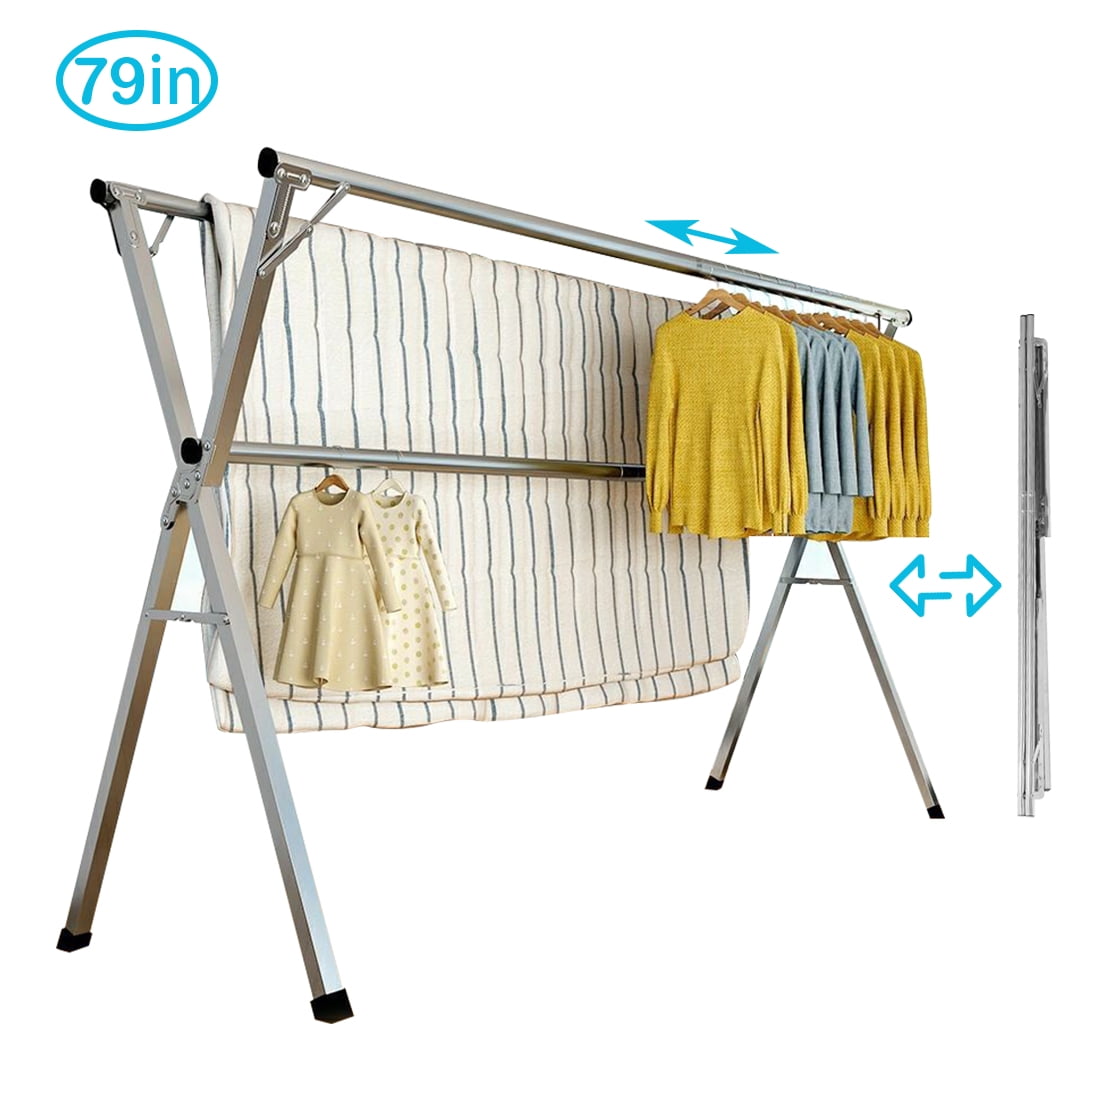 Untyo Metal Clothes Drying Rack Foldable Laundry Coat Hanger Double Rail  Adjustable Space-Saving Foldable Drying Hanger for Indoor and Outdoor